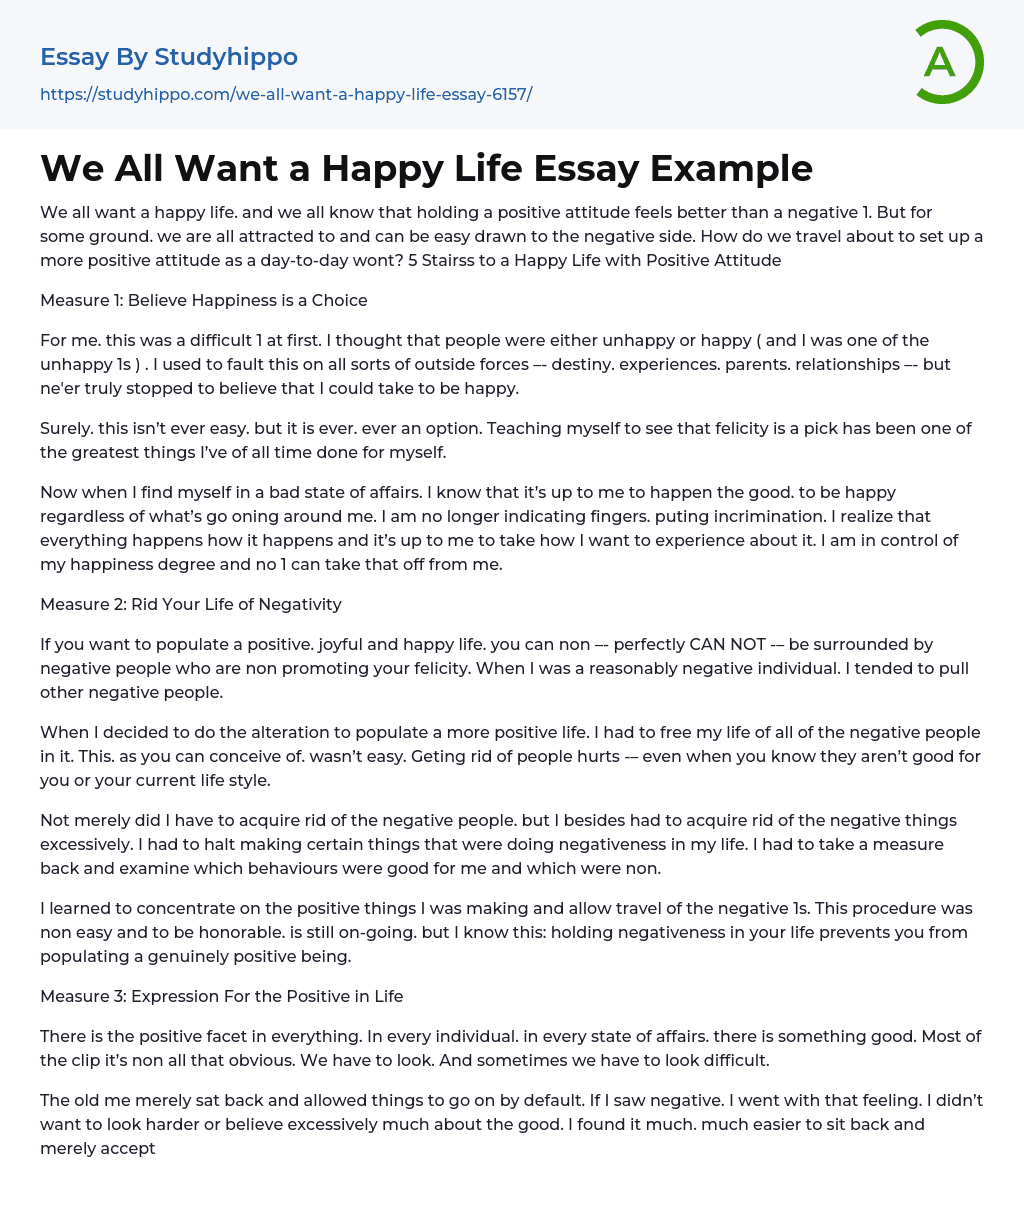 We All Want a Happy Life Essay Example